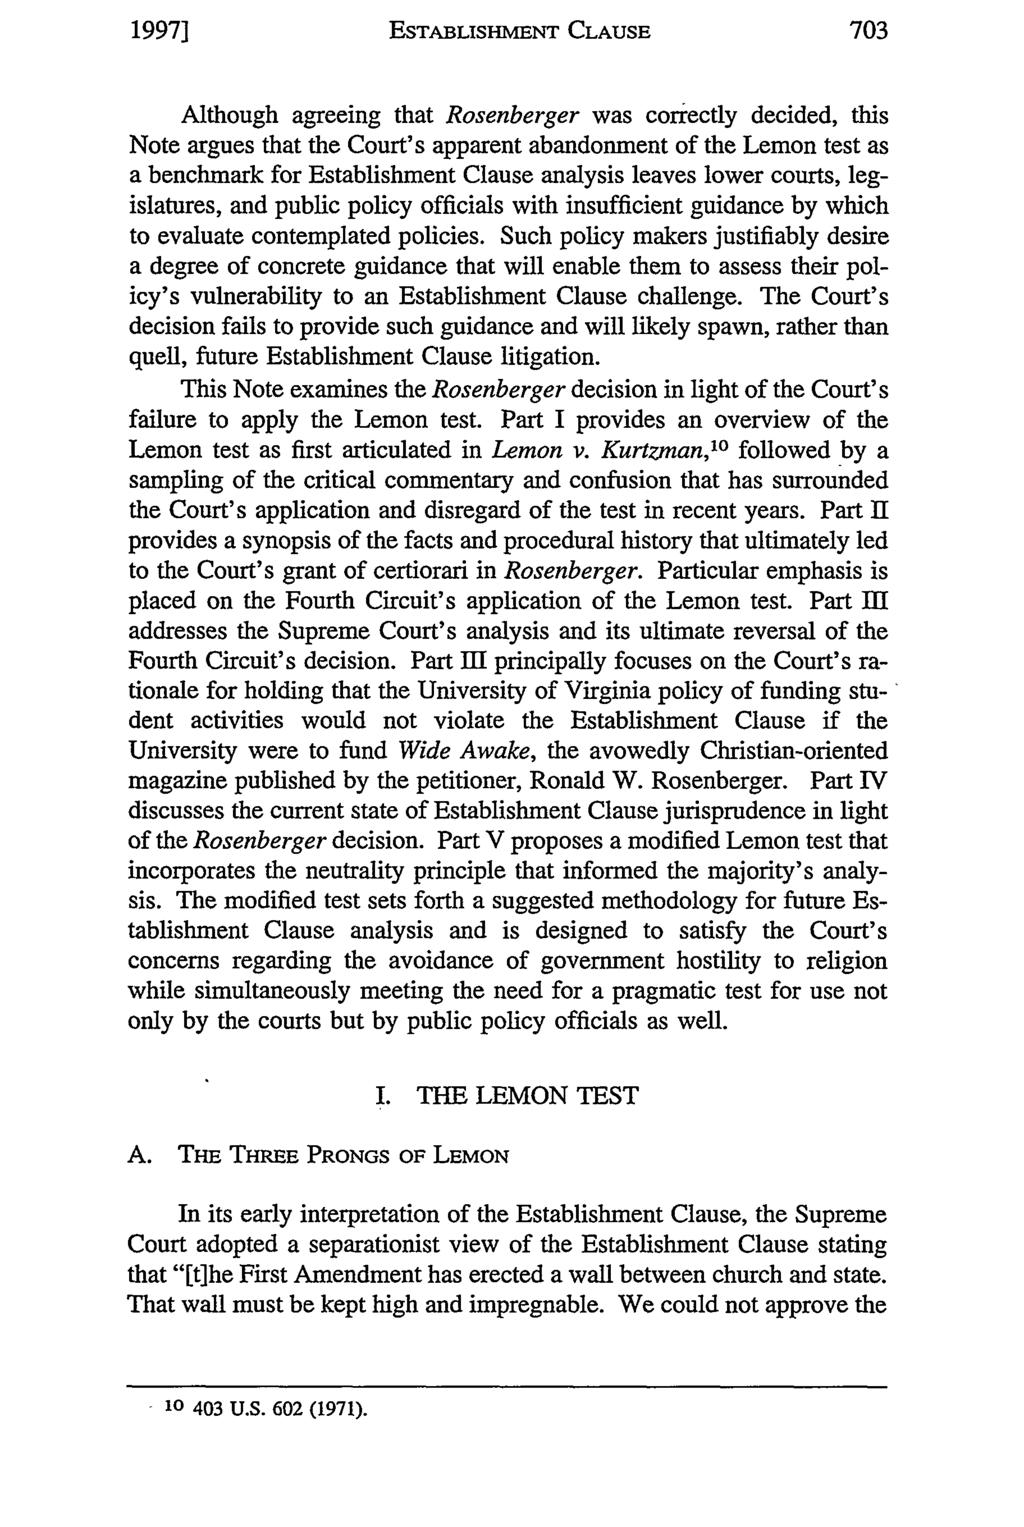 1997] ESTABLISHMENT CLAUSE Although agreeing that Rosenberger was correctly decided, this Note argues that the Court's apparent abandonment of the Lemon test as a benchmark for Establishment Clause